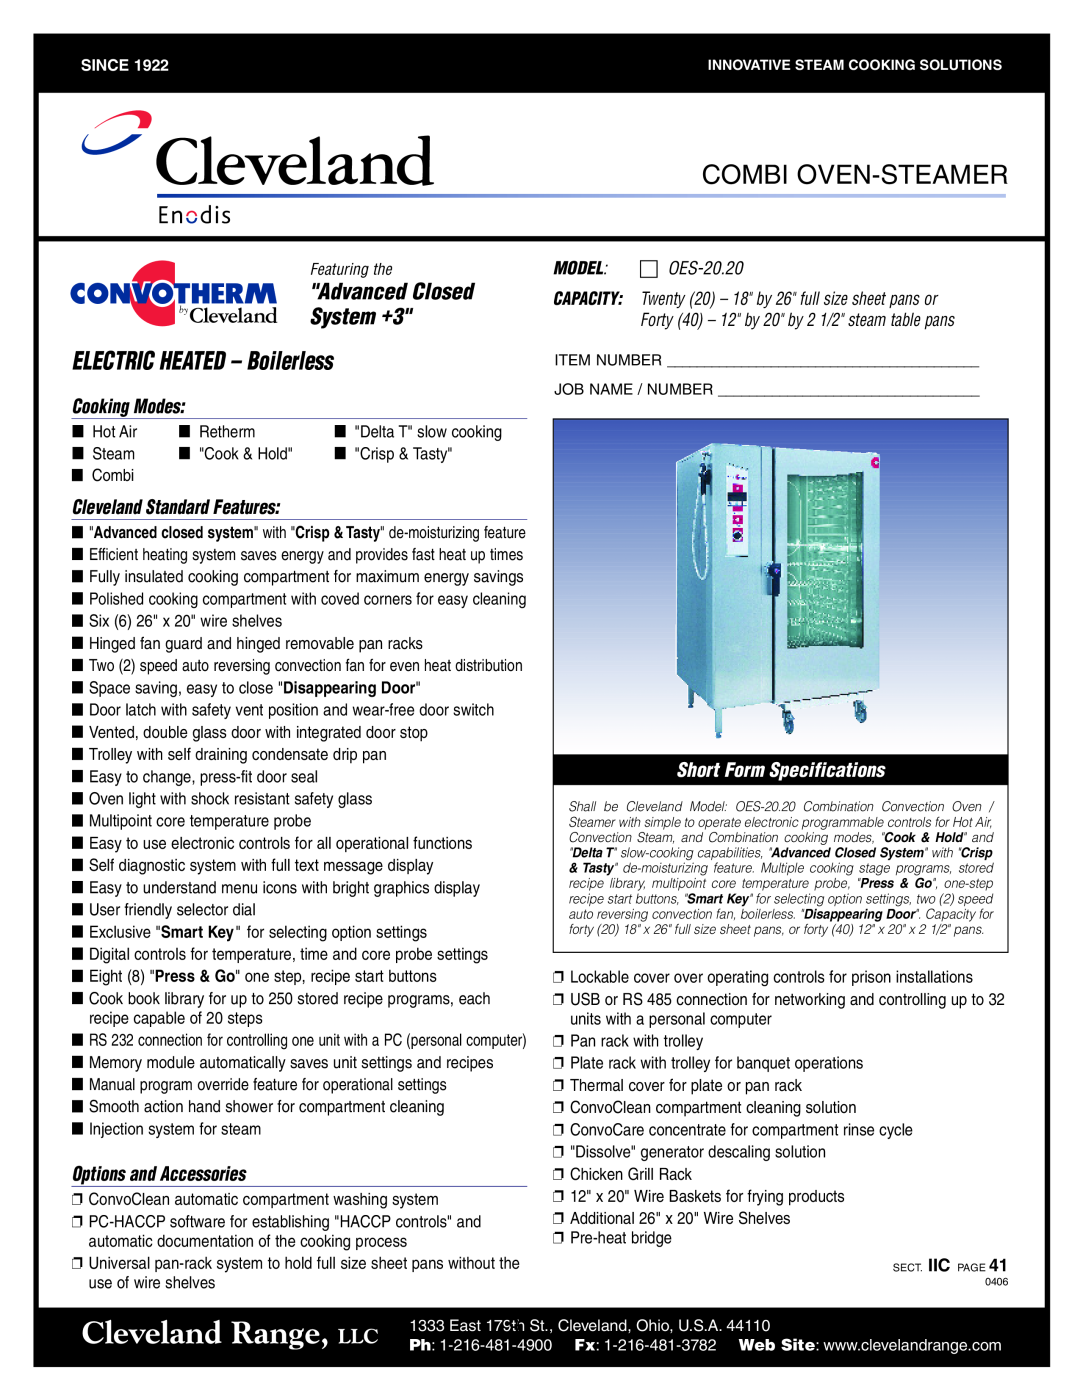 Cleveland Range OES-20.20 ELECTRIC HEATED - Boilerless, Advanced Closed, Cleveland Range, LLC, Combi Oven-Steamer, Hot Air 